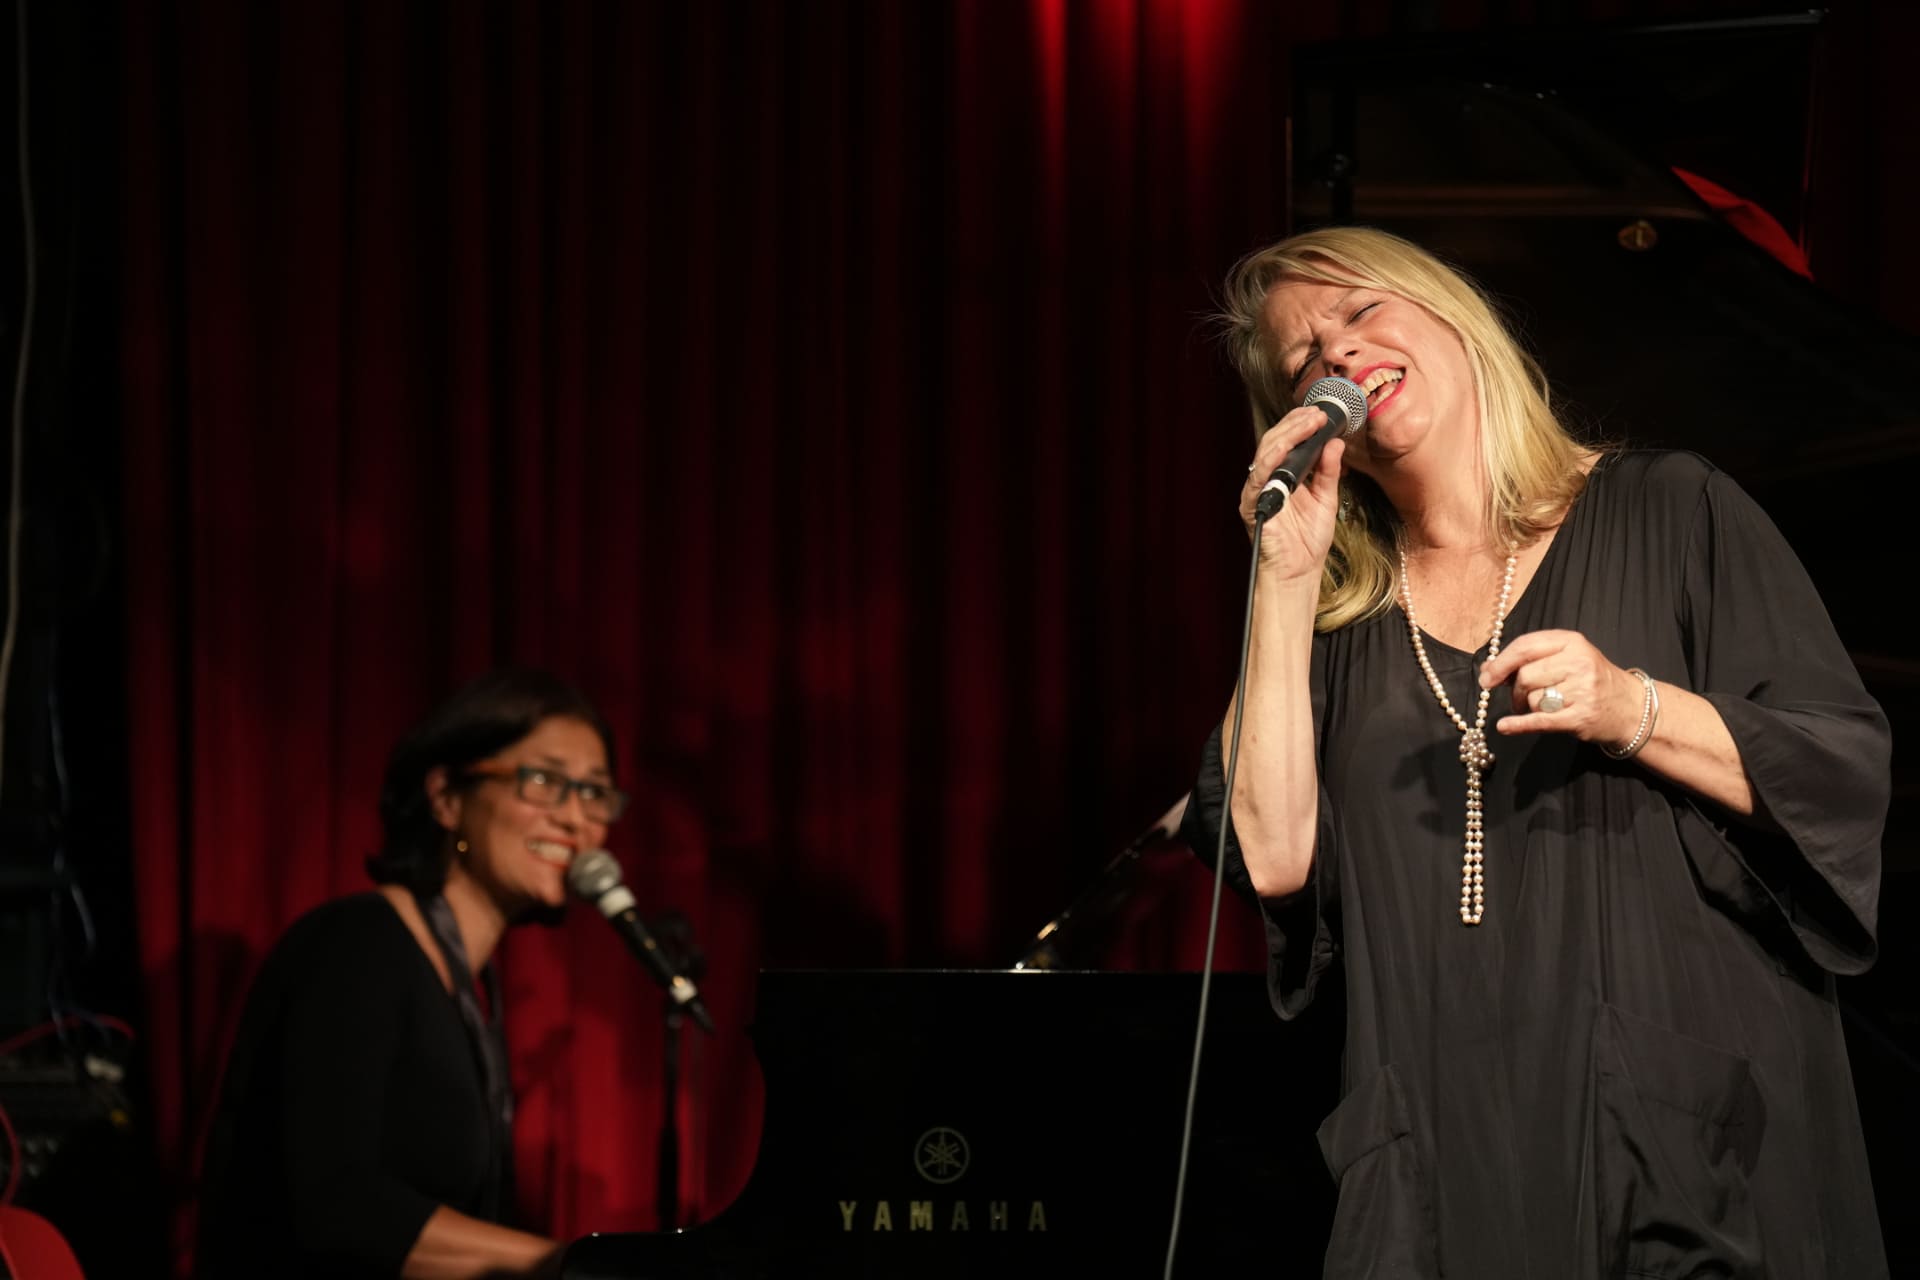 Rebecca Barnard on stage with a pianist, singing jazz. She is wearing a long black dress and pearl necklace